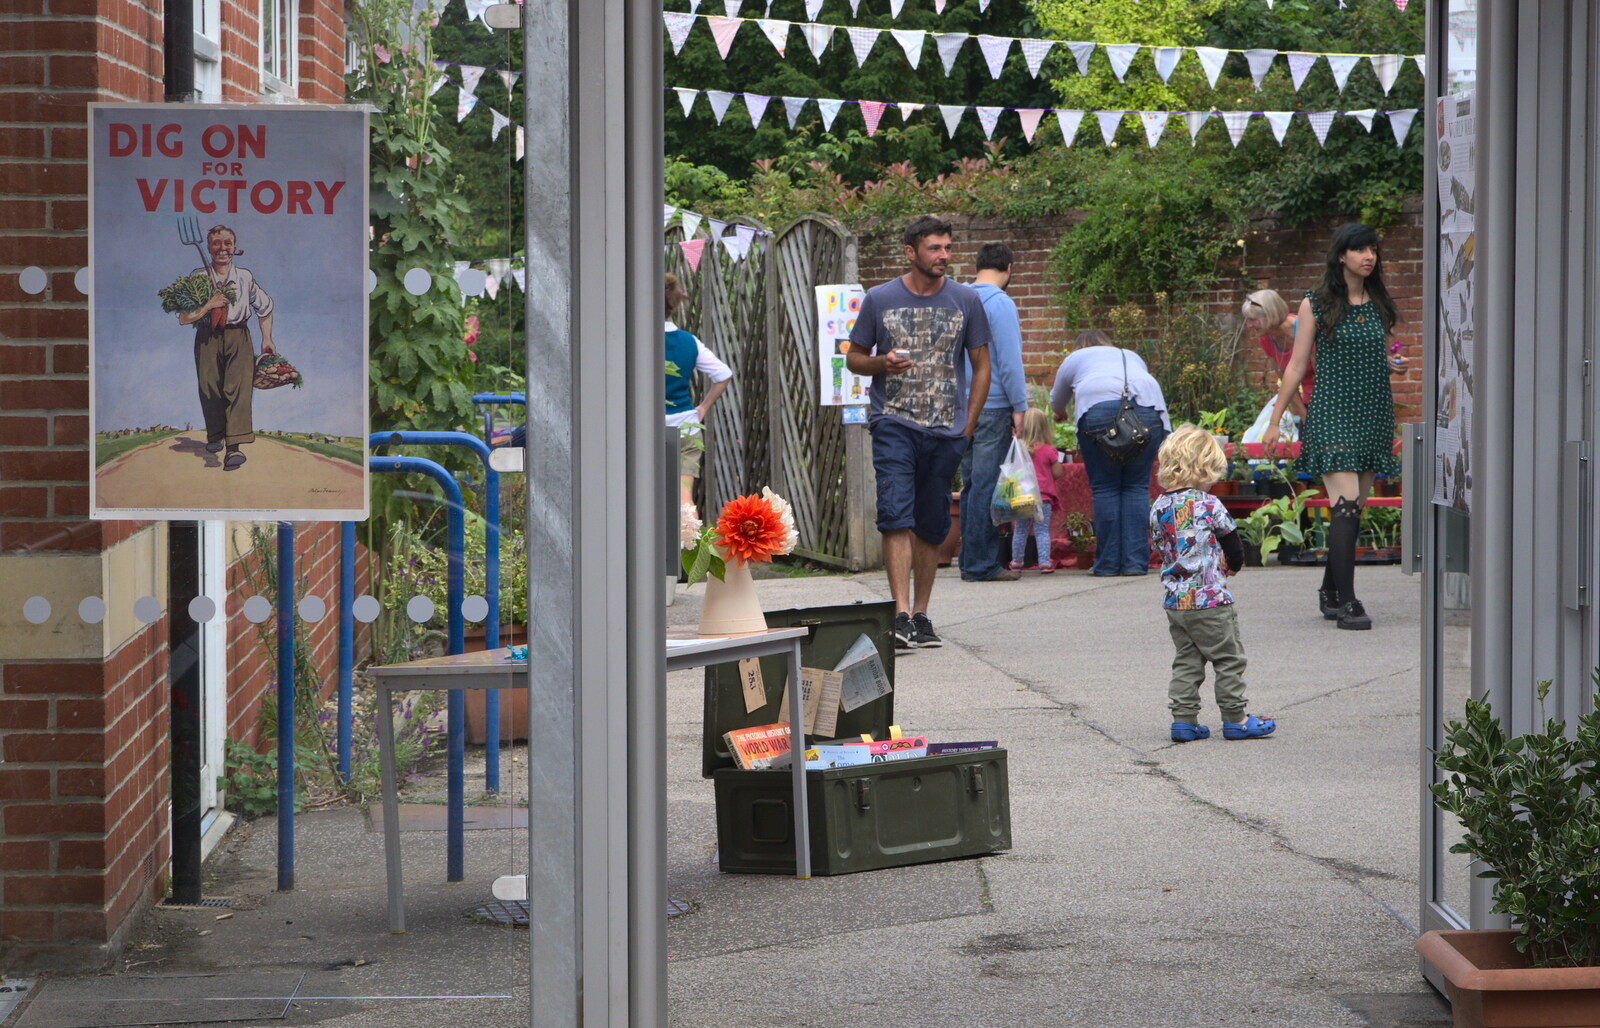 The school entrance has a wartime poster from St. Peter and St. Paul's School Summer Fete, Eye, Suffolk - 12th July 2014